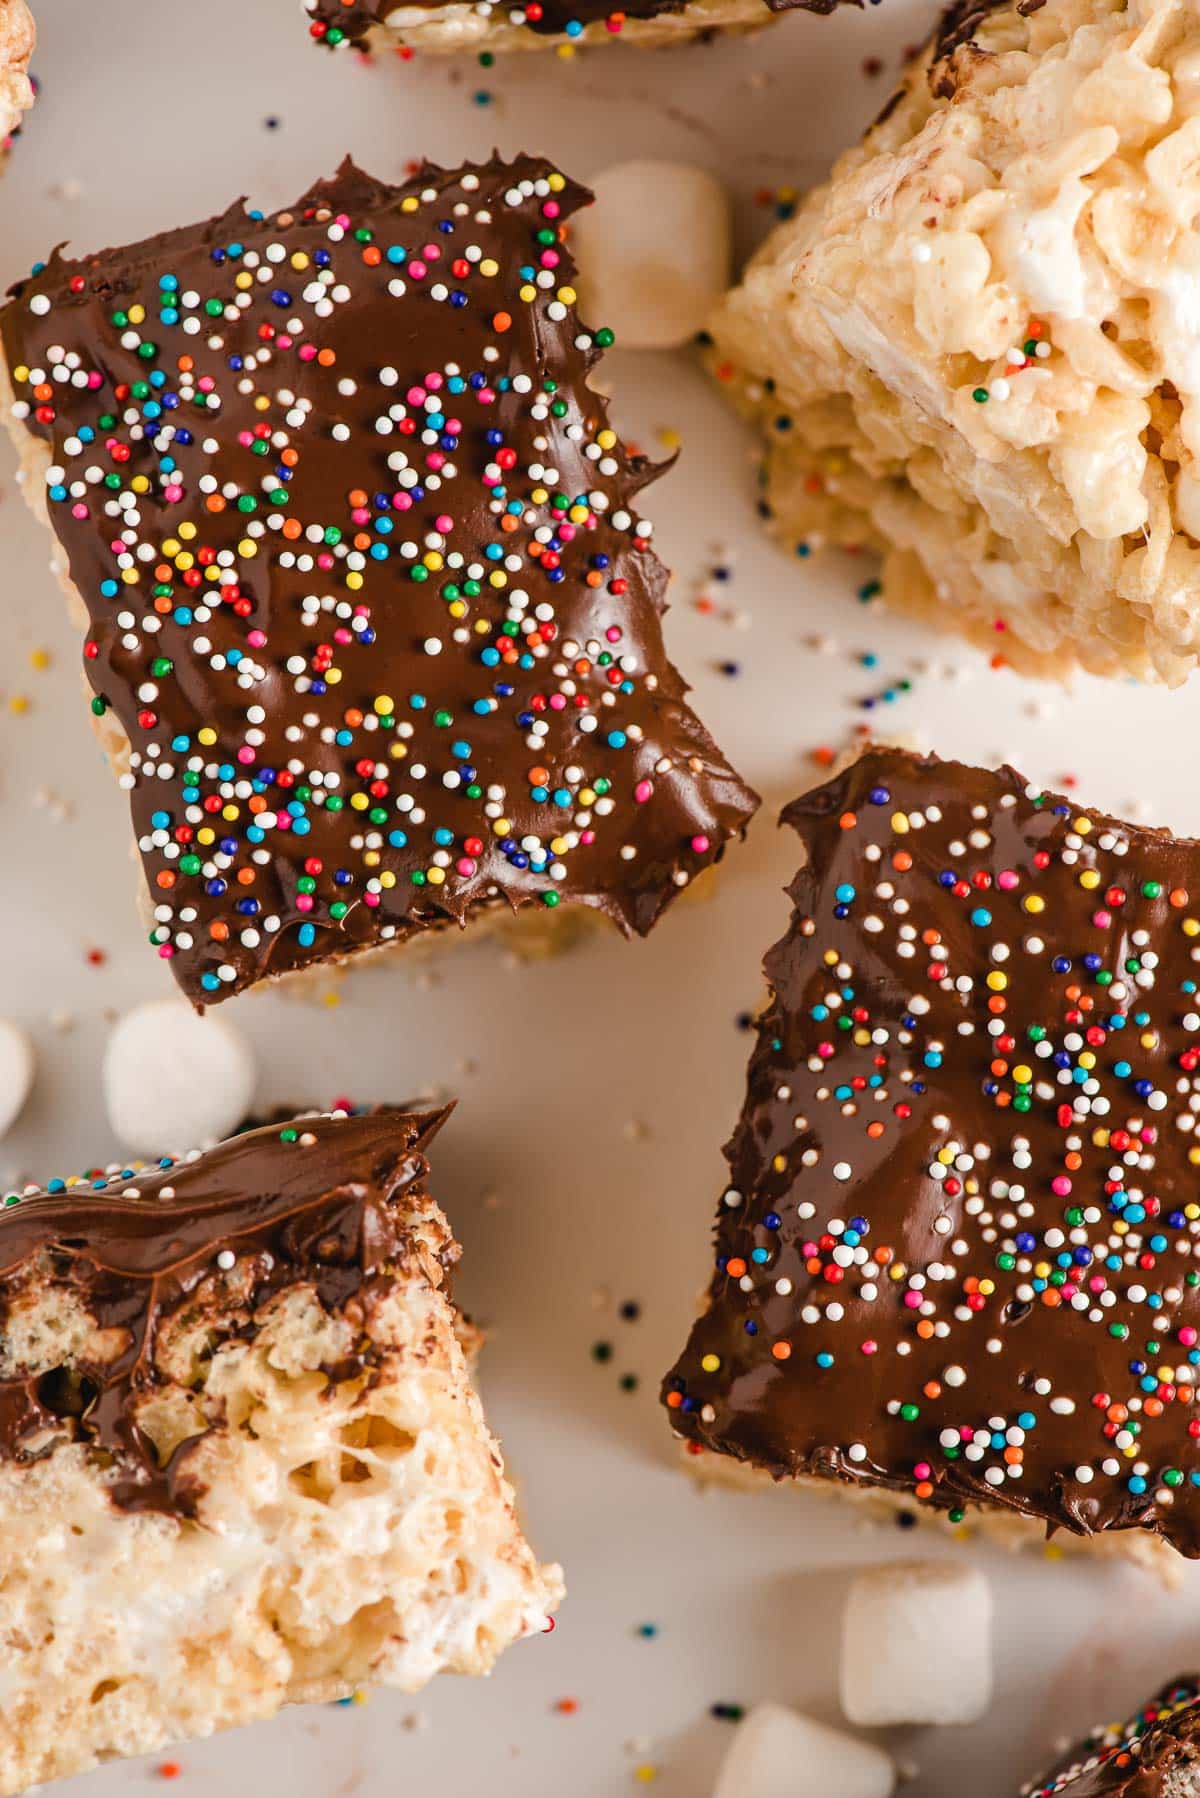 Chocolate Covered Rice Krispie Treats with sprinkles, sliced into bars.